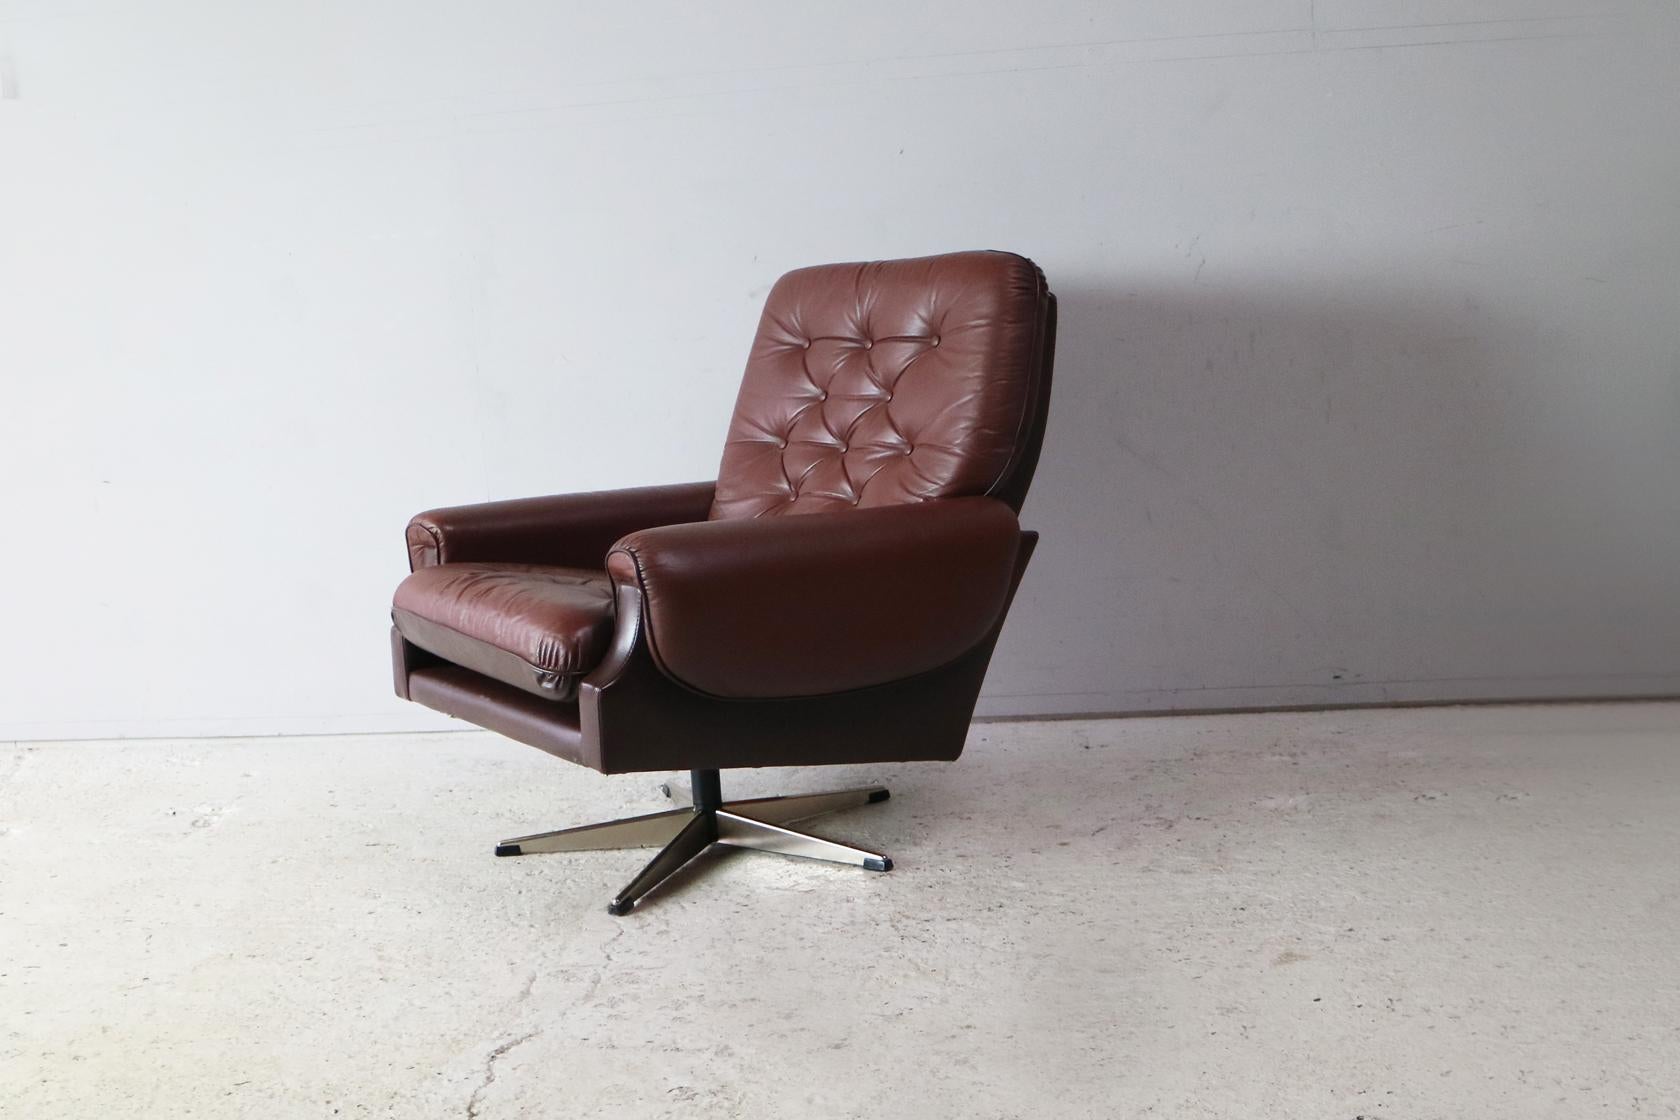 Plated 1960s Danish Midcentury Leather Swivel Lounge Chair For Sale